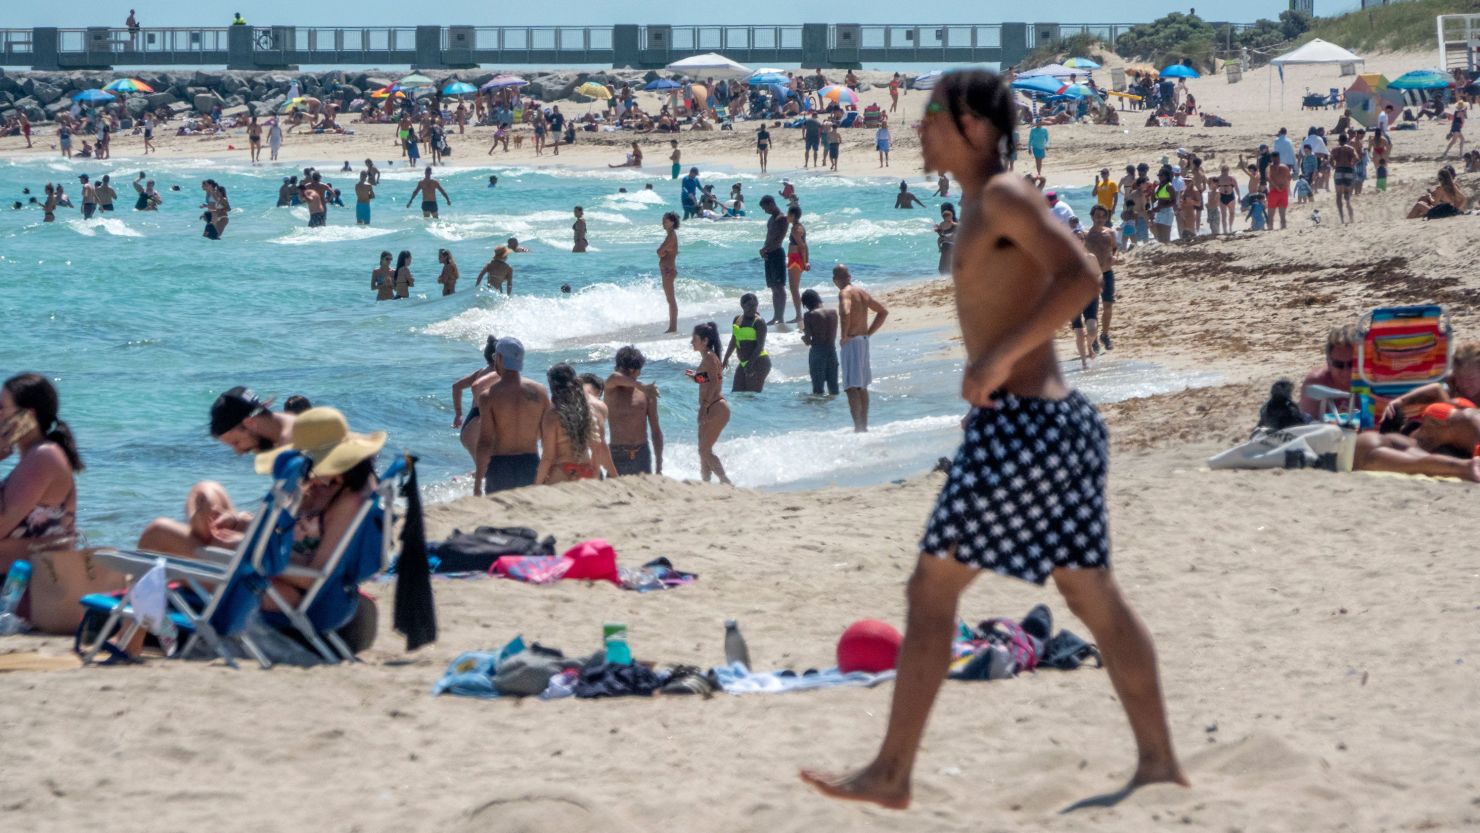 People spend spring break at the beach in Miami Beach, Florida, during the ongoing coronavirus pandemic.